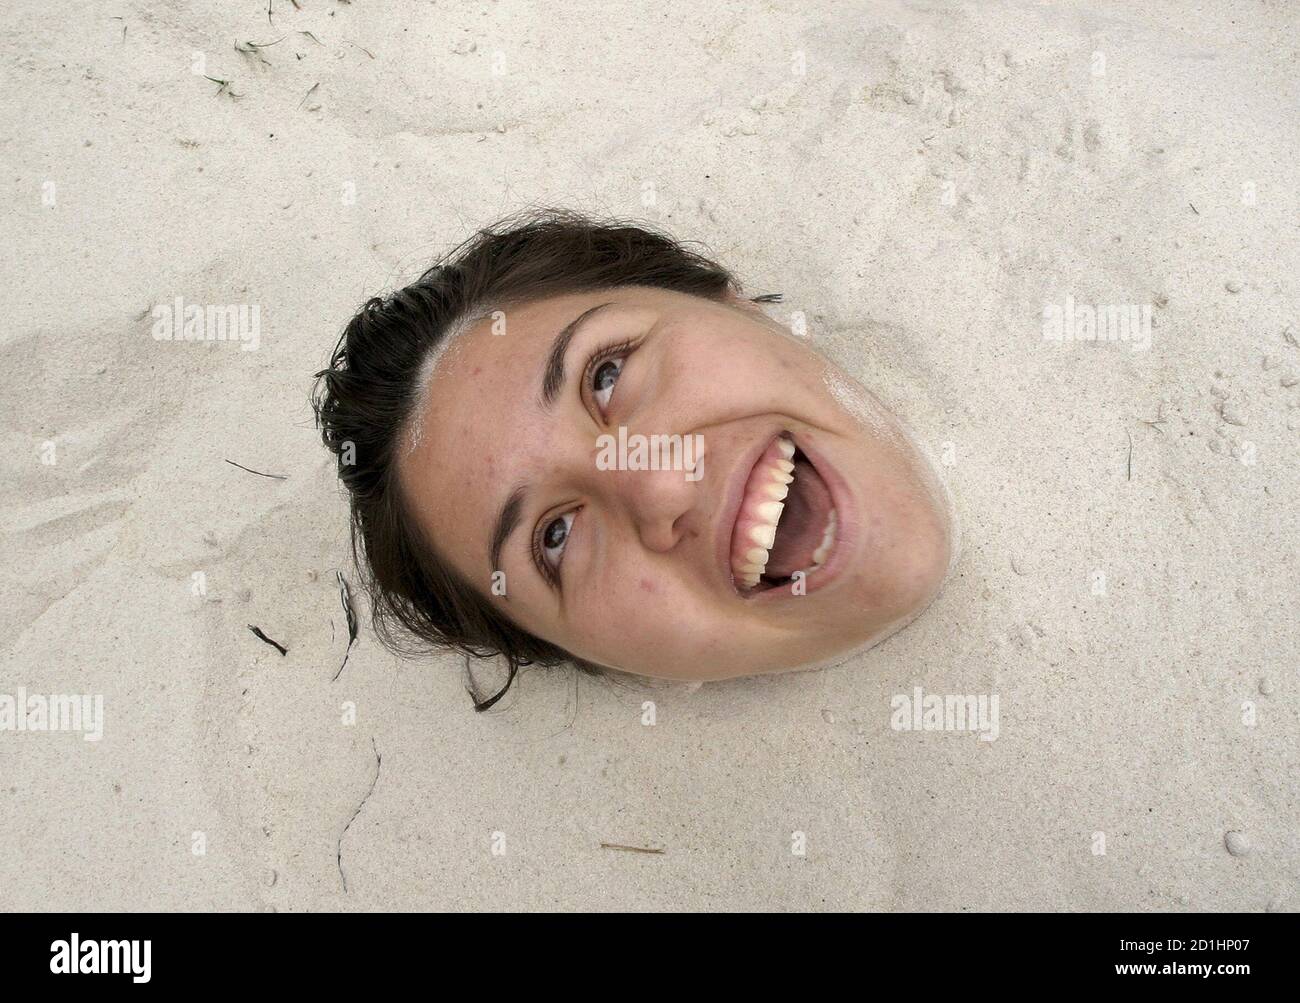 A youth is covered in sand during the opening day of the first of four city beaches in Mexico City April 3, 2007. Mexico City's first beach was already buzzing by mid-afternoon on Tuesday, the official launch day, with paddling pools and volleyball to entertain the throngs. REUTERS/Daniel Aguilar (MEXICO) Stock Photo